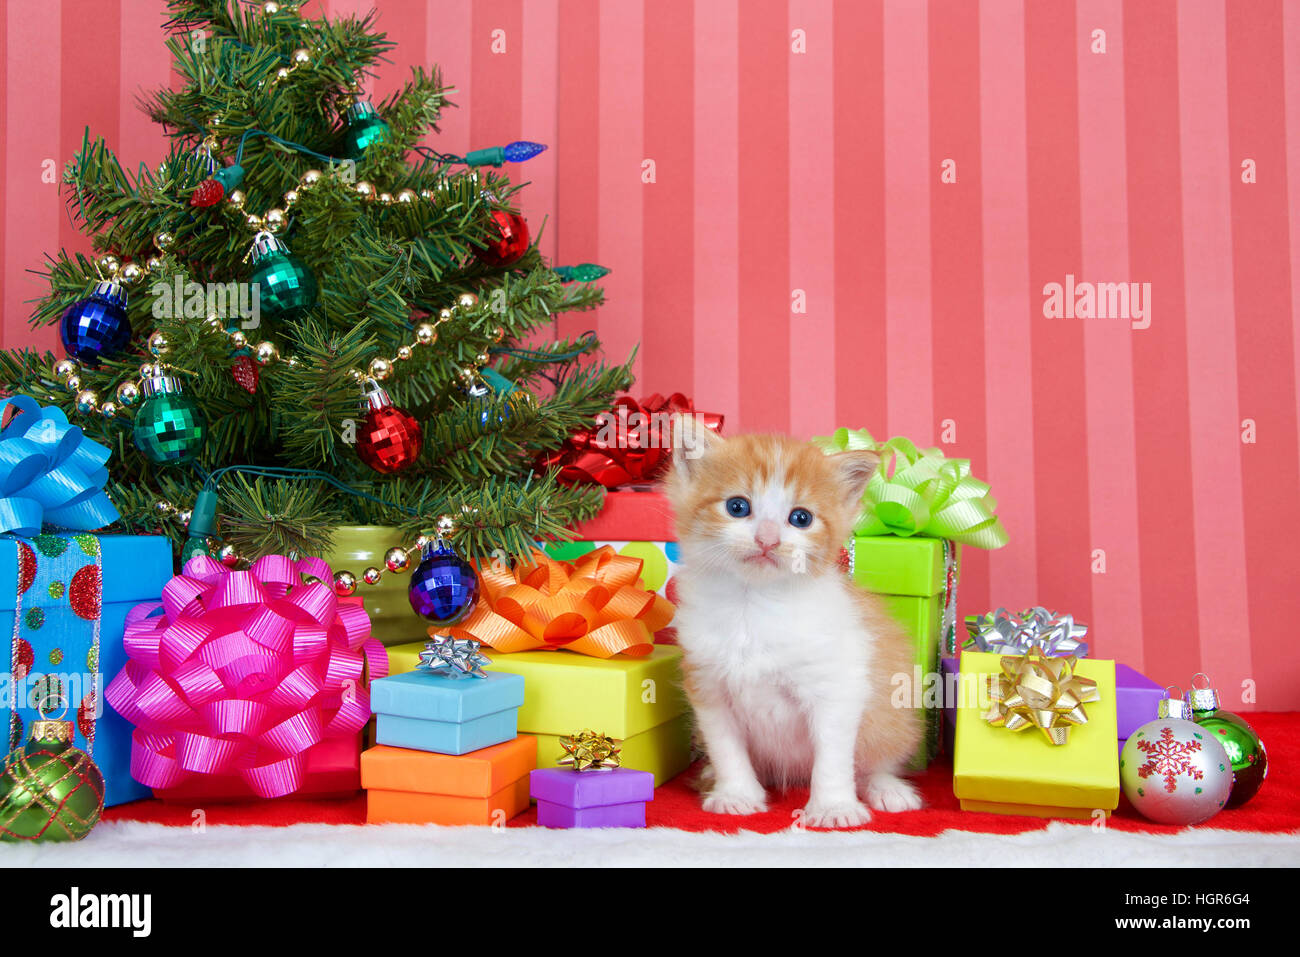 Adorable orange and white tabby kitten three weeks old sitting in a pile of christmas presents under a small tree decorated with ball ornaments and go Stock Photo